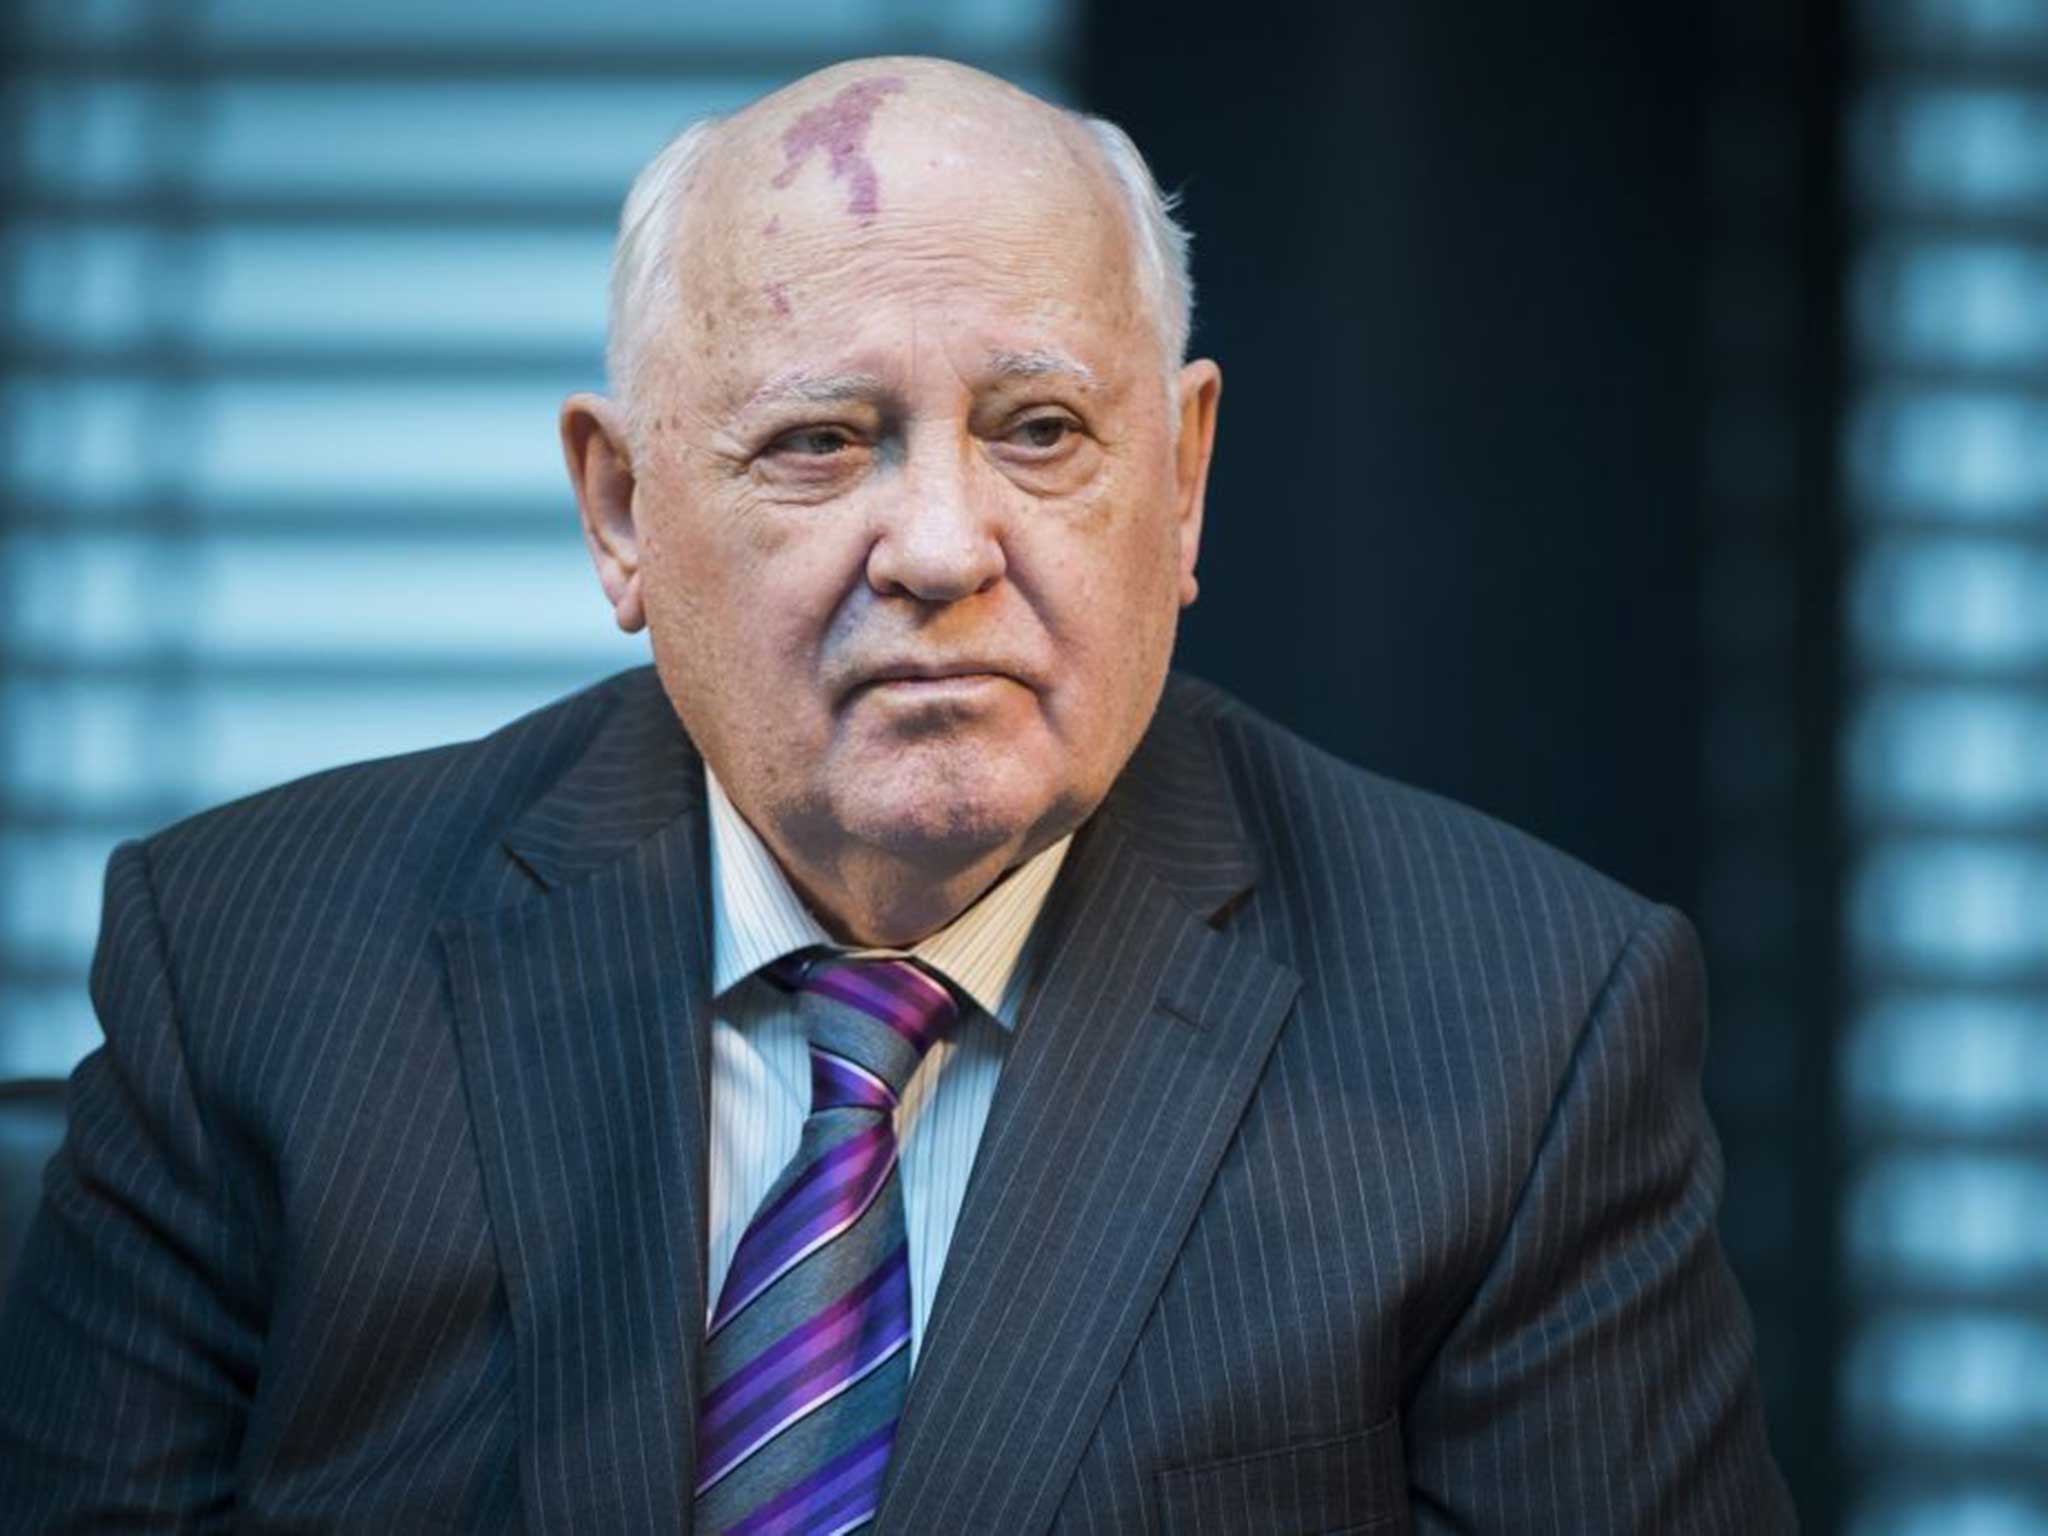 Gorbachev spoke at an event commemorating the fall of the Berlin Wall